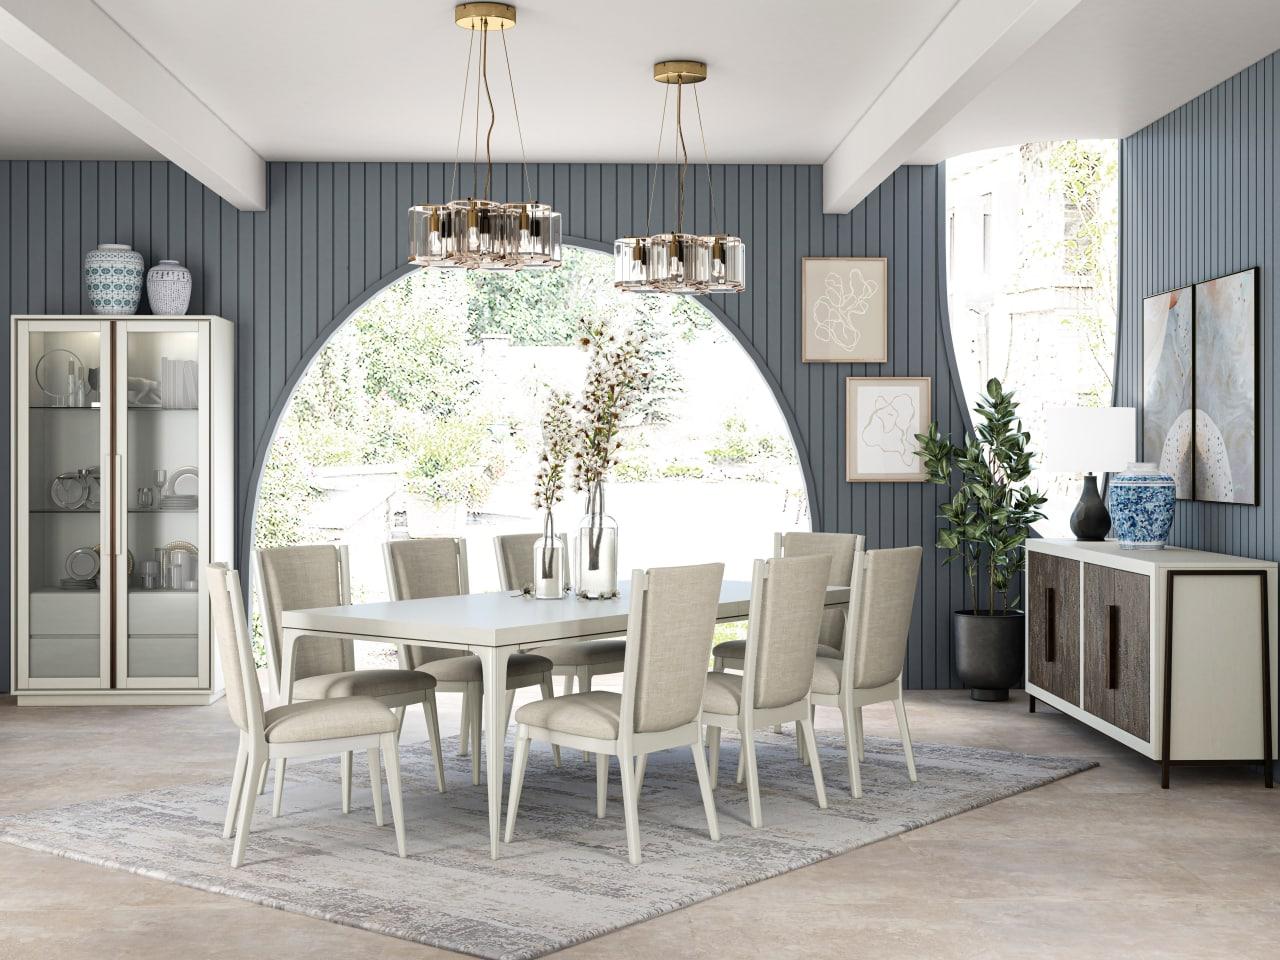 Modern, Casual Dining Table Set Blanc 289220-1040-8pcs in Beige Fabric